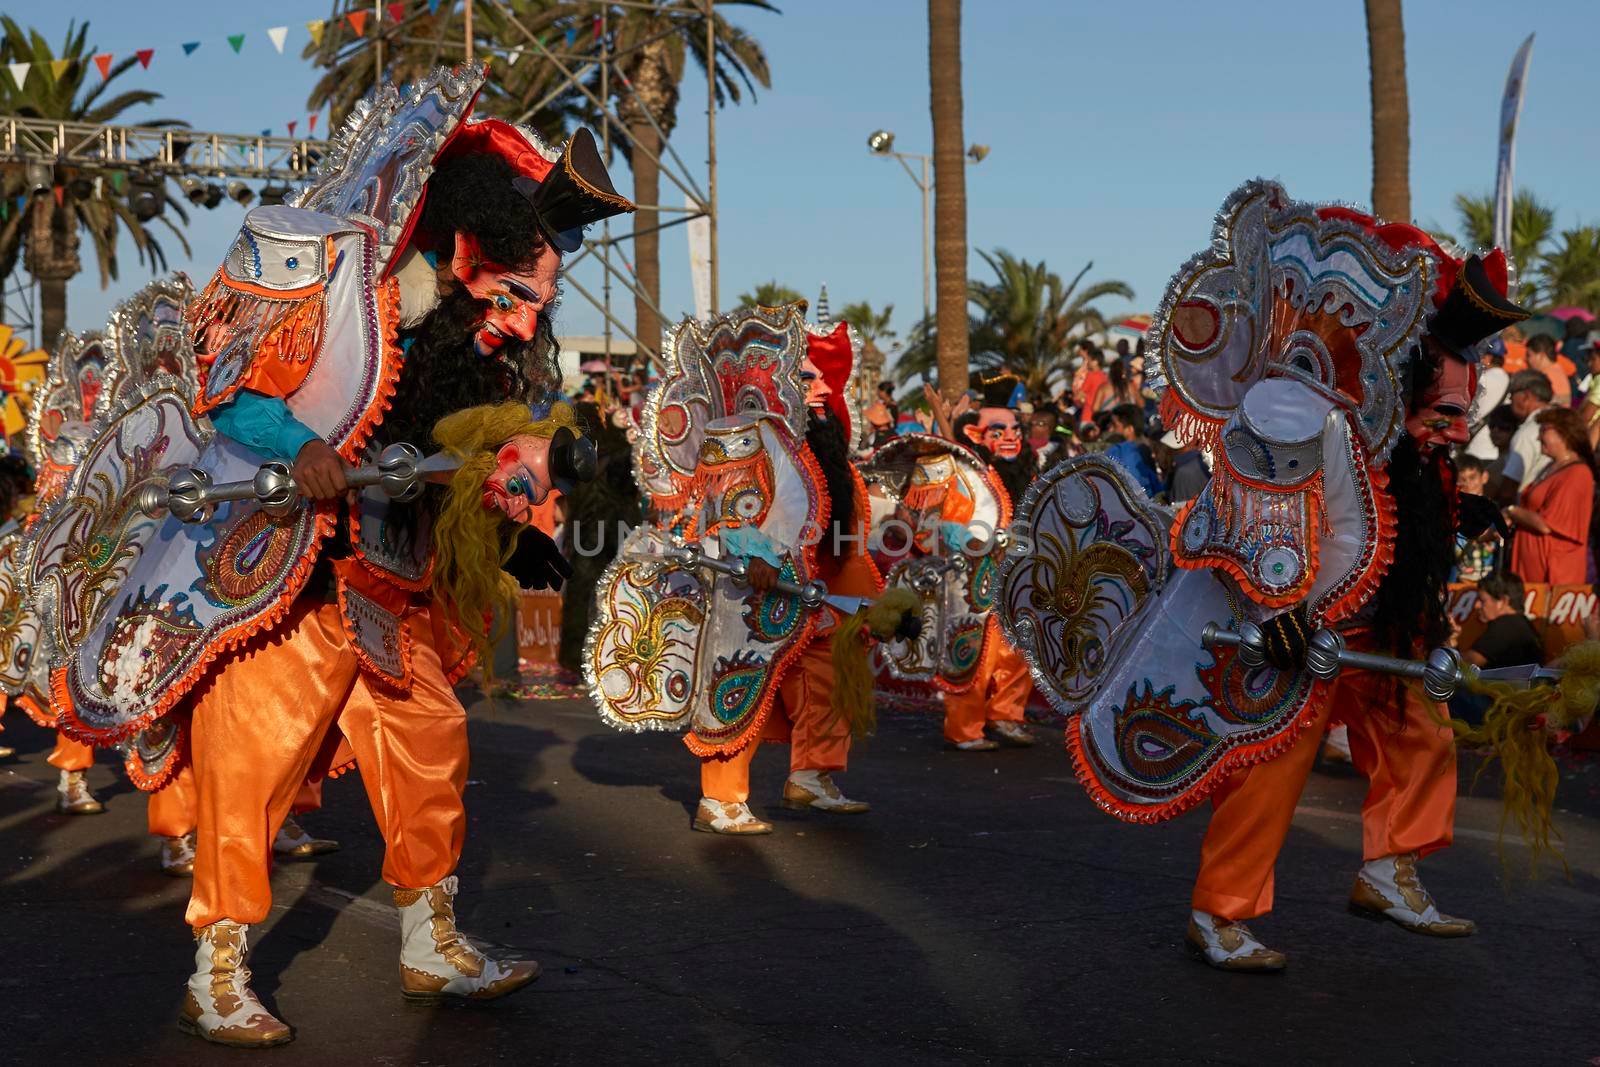 Arica, Chile - January 23, 2016: Morenada dance group performing a traditional ritual dance as part of the Carnaval Andino con la Fuerza del Sol in Arica, Chile.